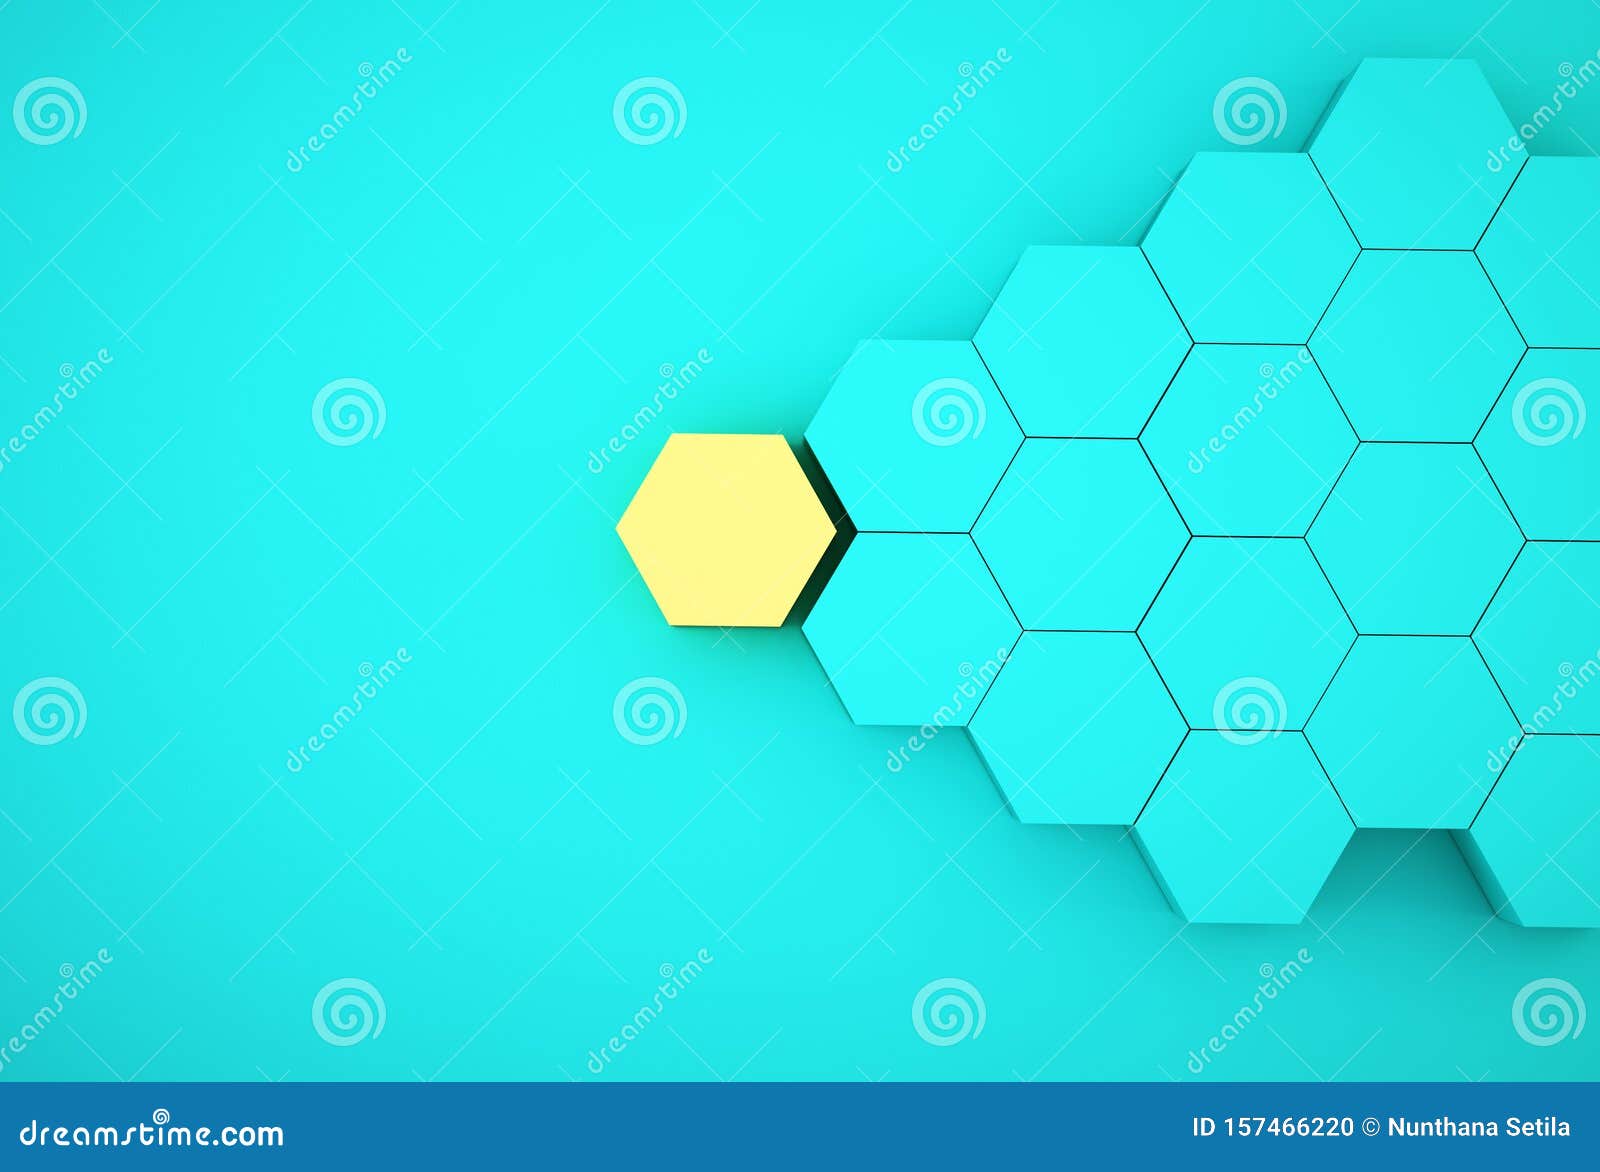 abstract photo of ourstanding yellow beehive-like hexagons among blue hexagons on blue background. minimal business concept